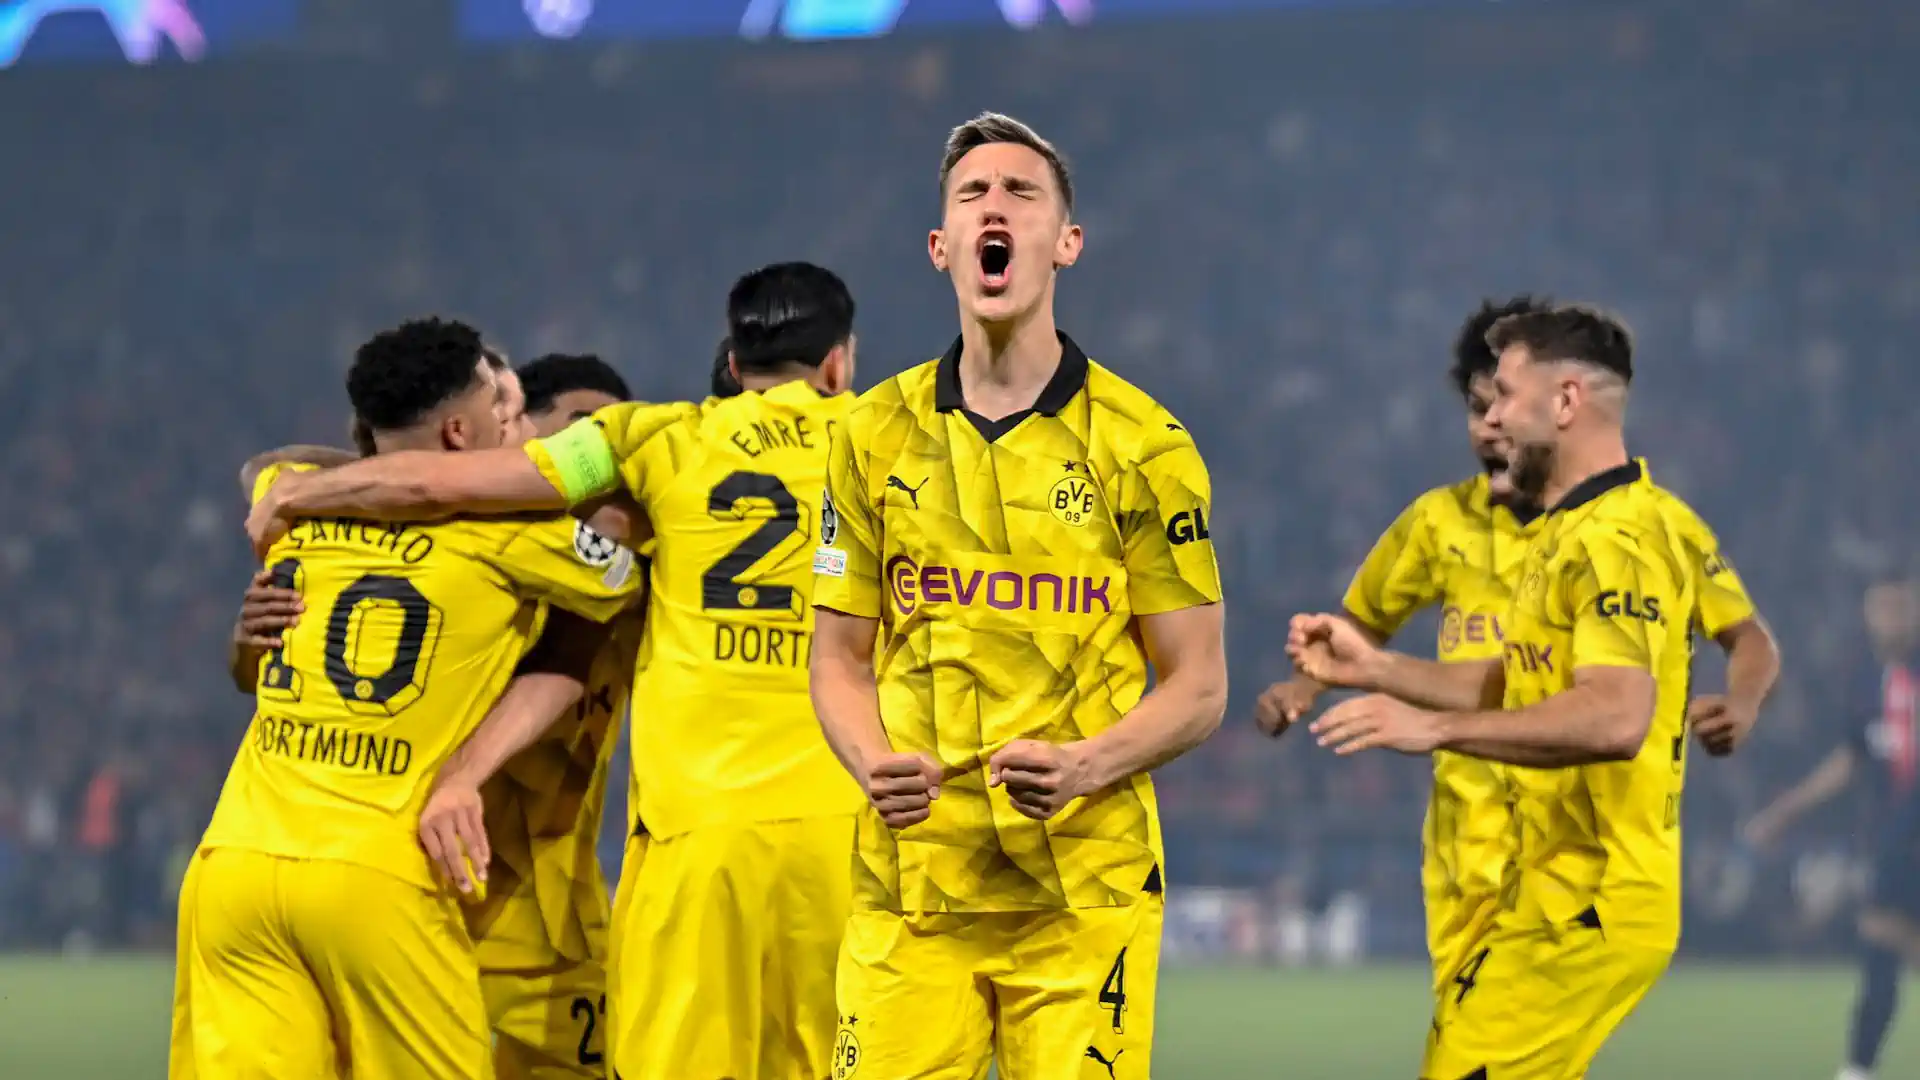 Borussia Dortmund reach the Champions League final for the third time in history